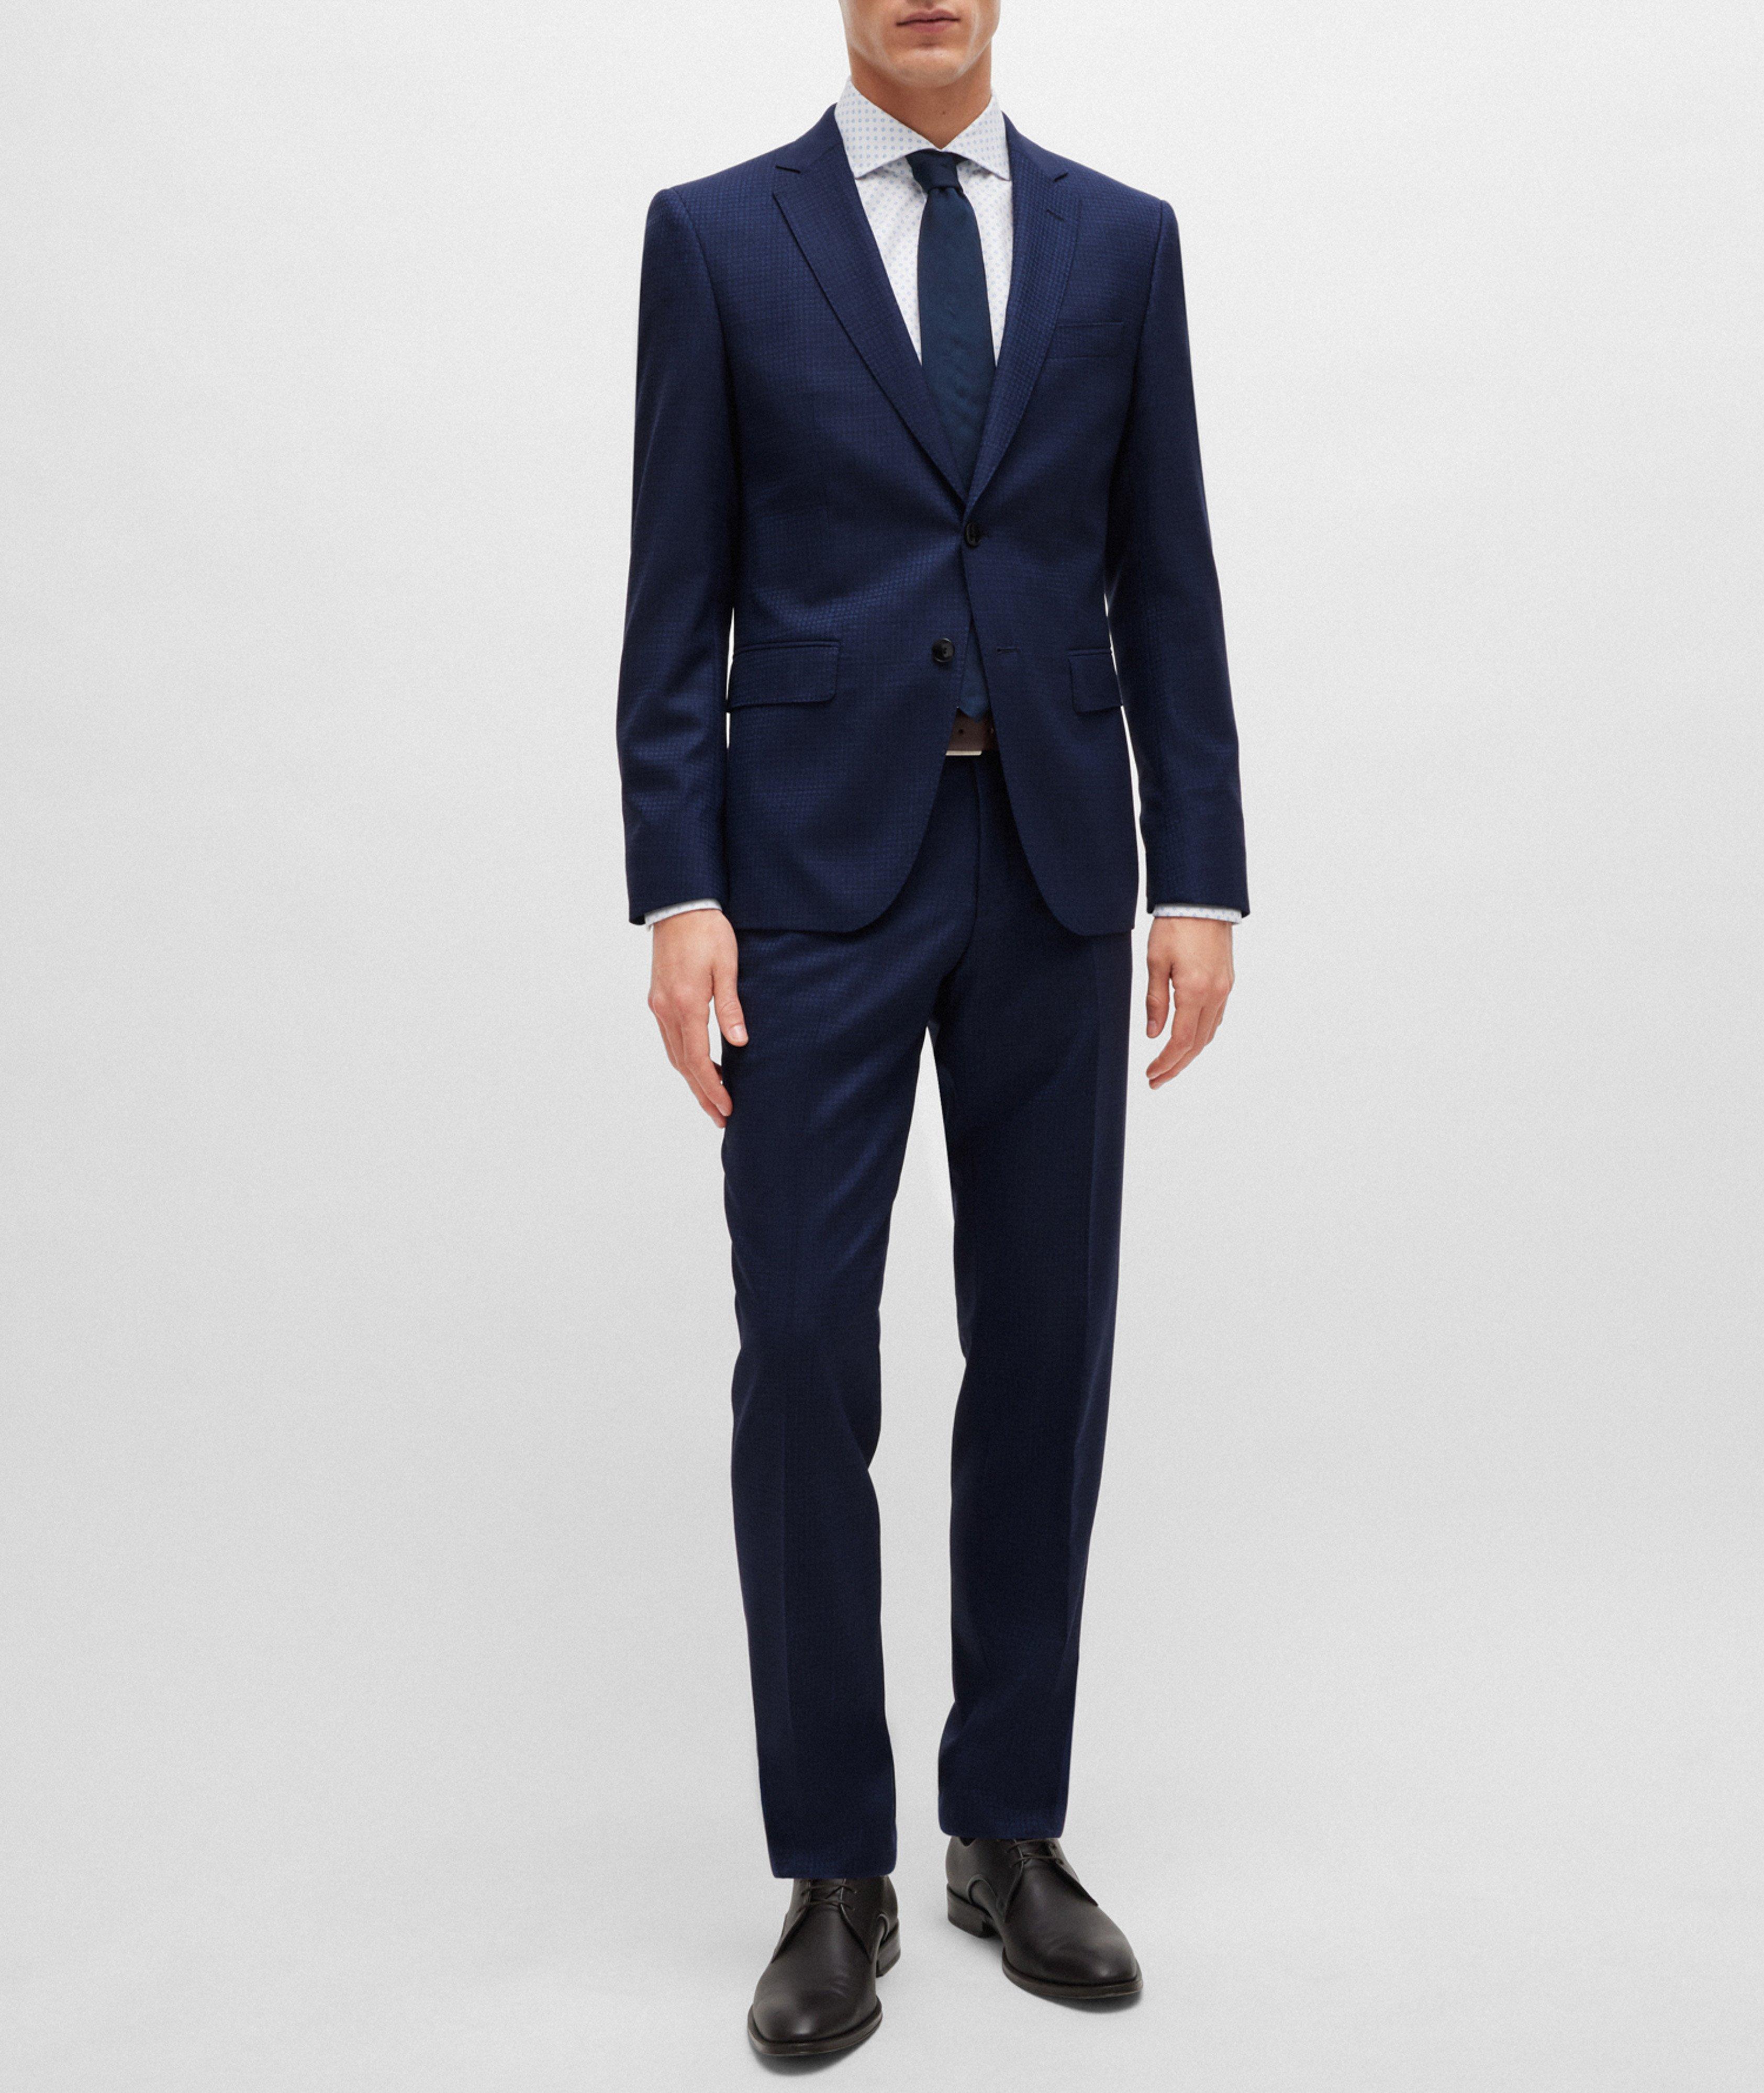 Checked Slim-Fit Suit image 5